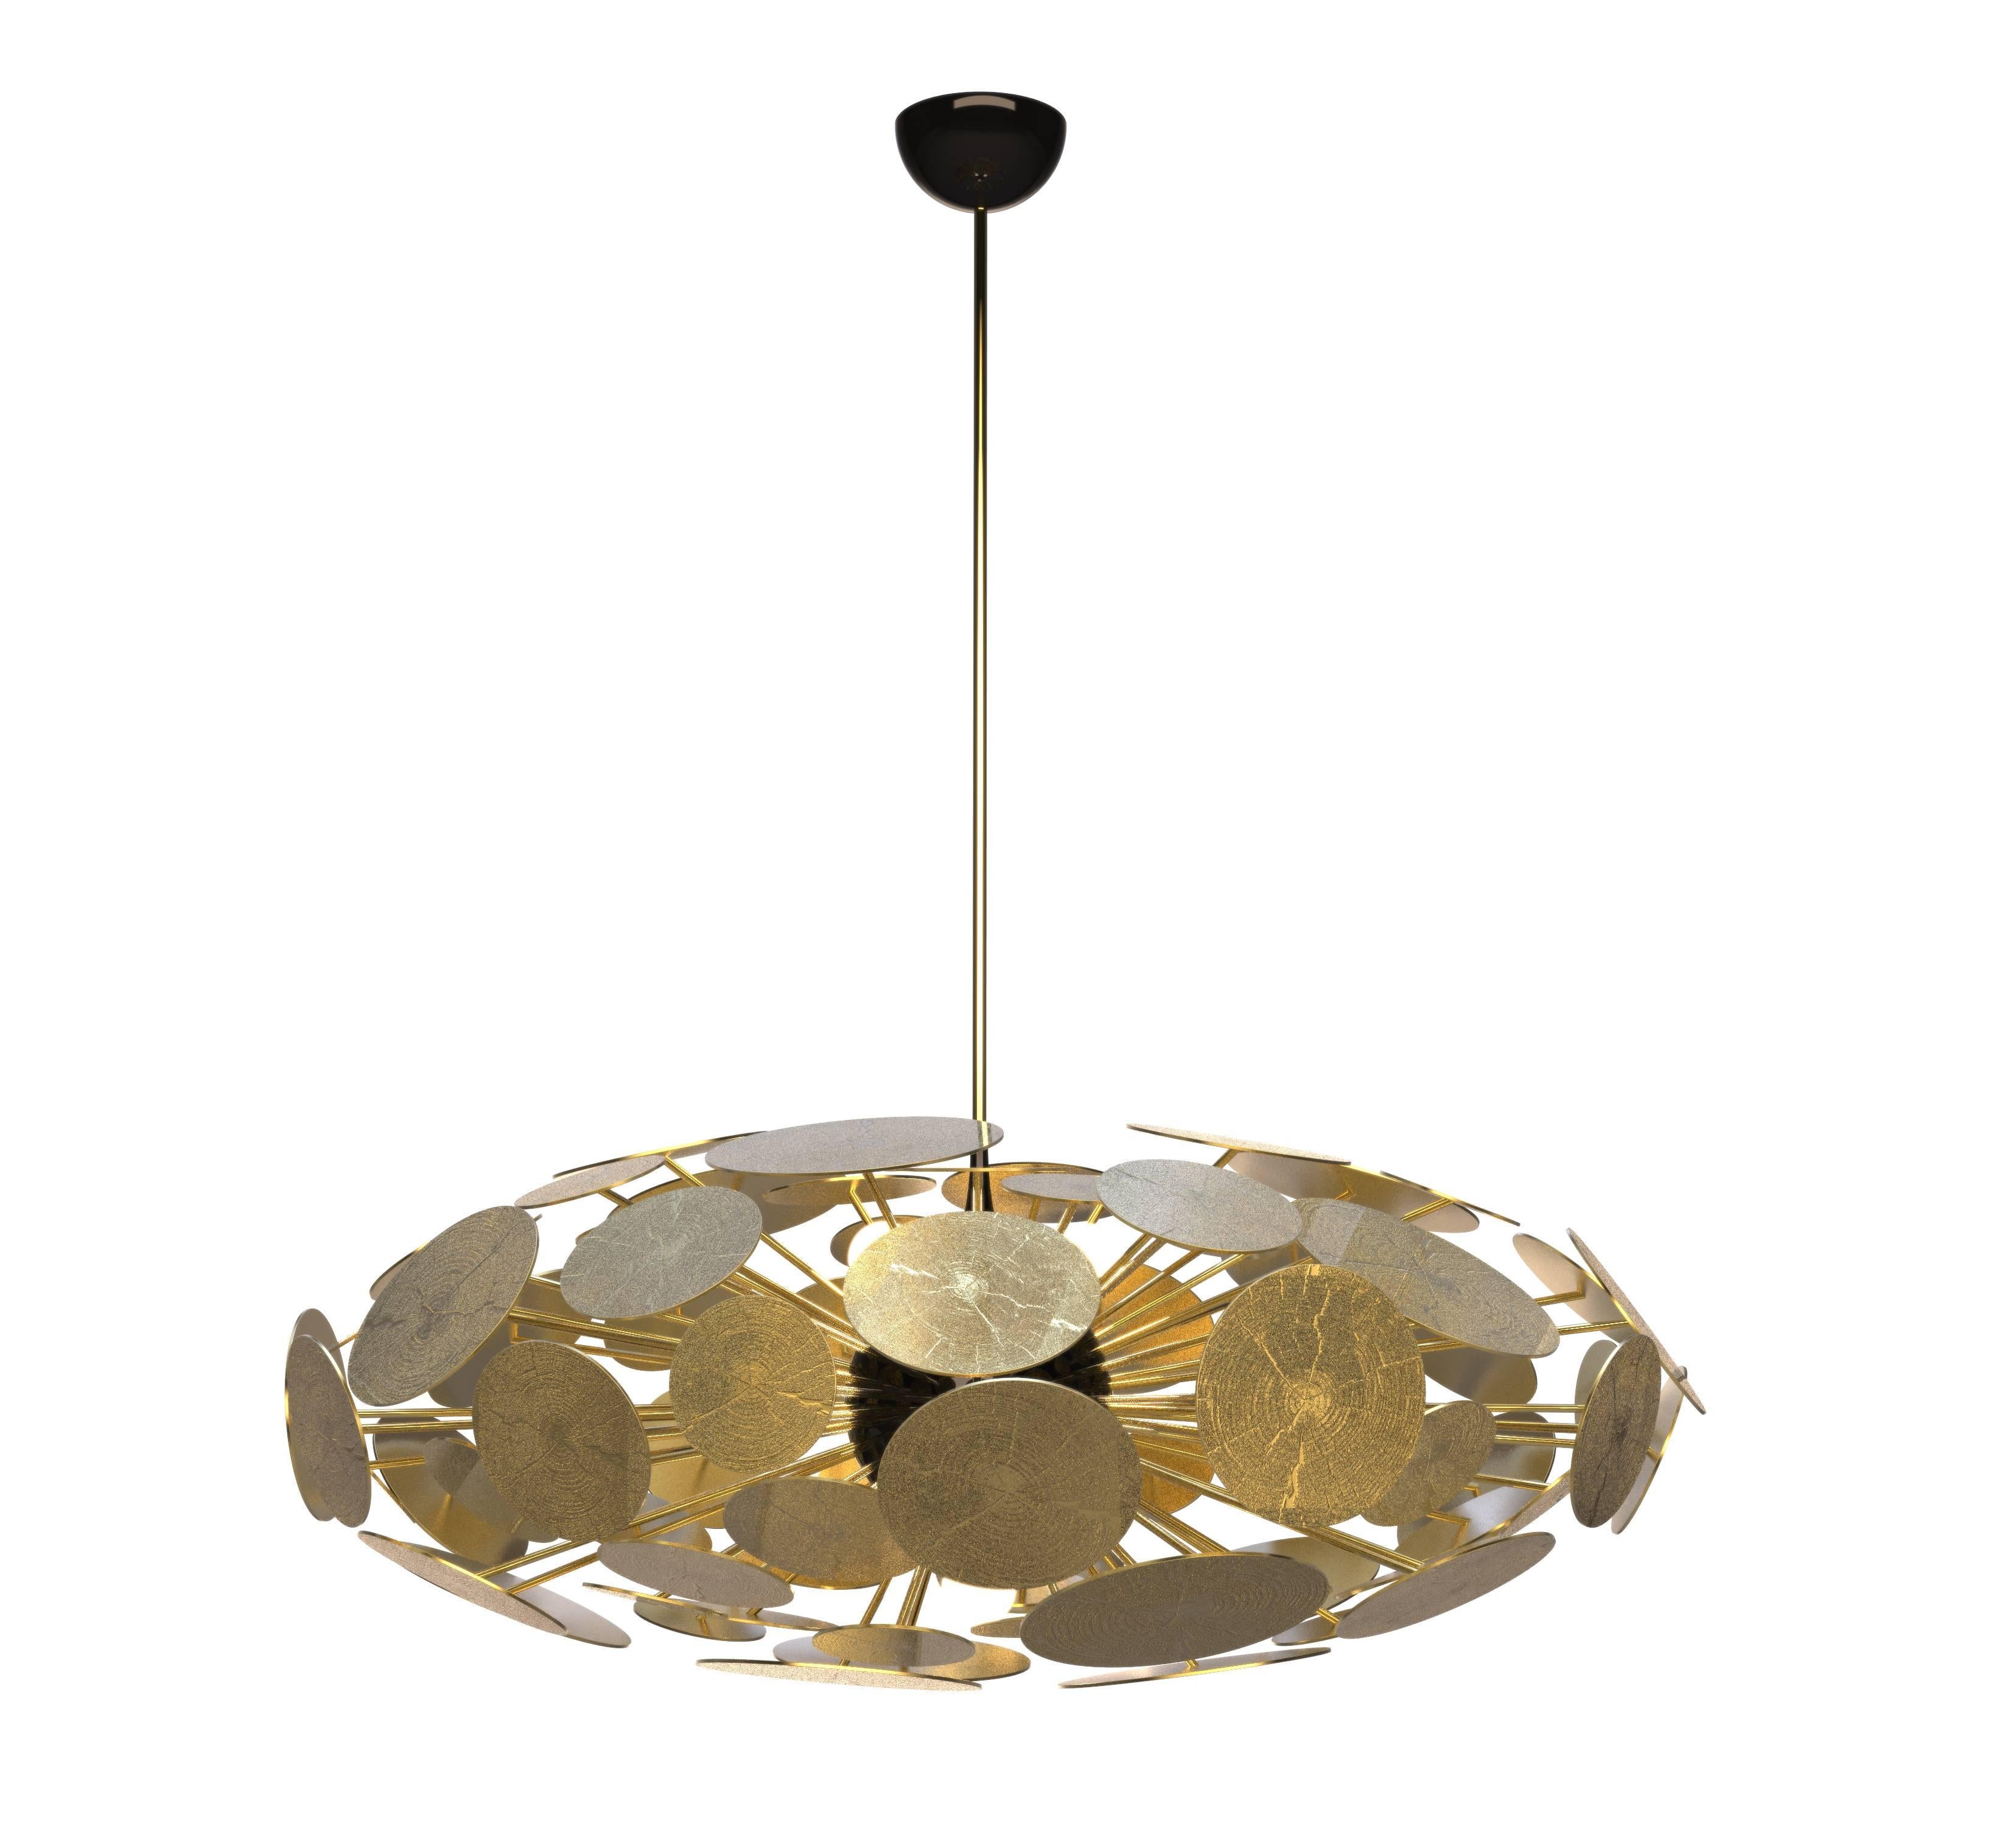 Large circular Modern Gold-Plated Newton Chandelier by Boca Do Lobo from Europe In Excellent Condition For Sale In Sydney, NSW